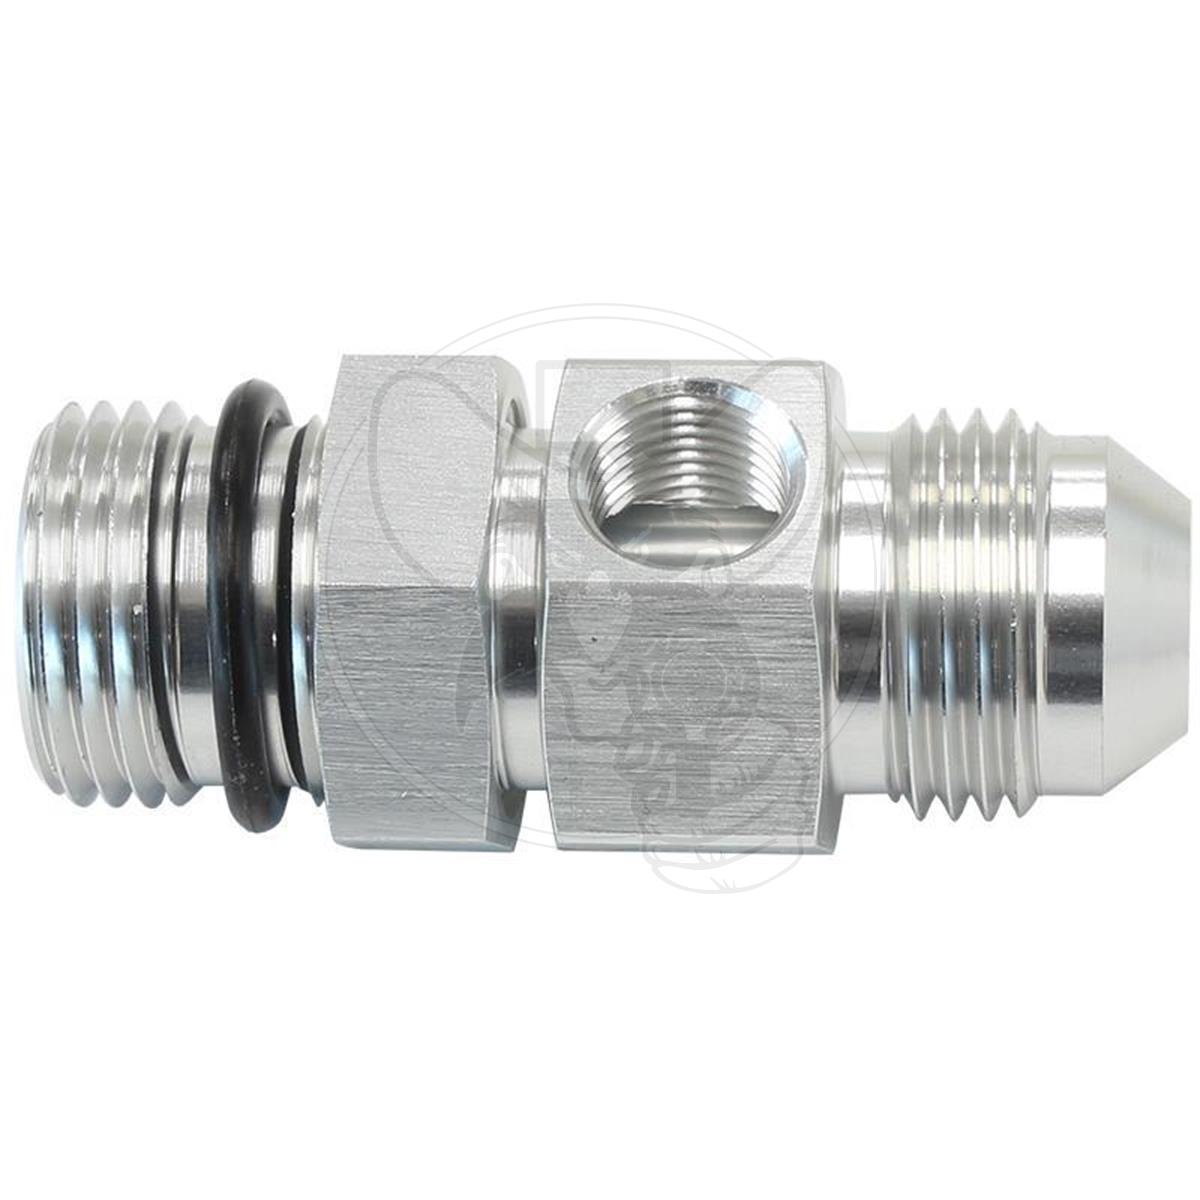 Aeroflow -10 ORB to -10AN Extension with 1/8" Port - Silver